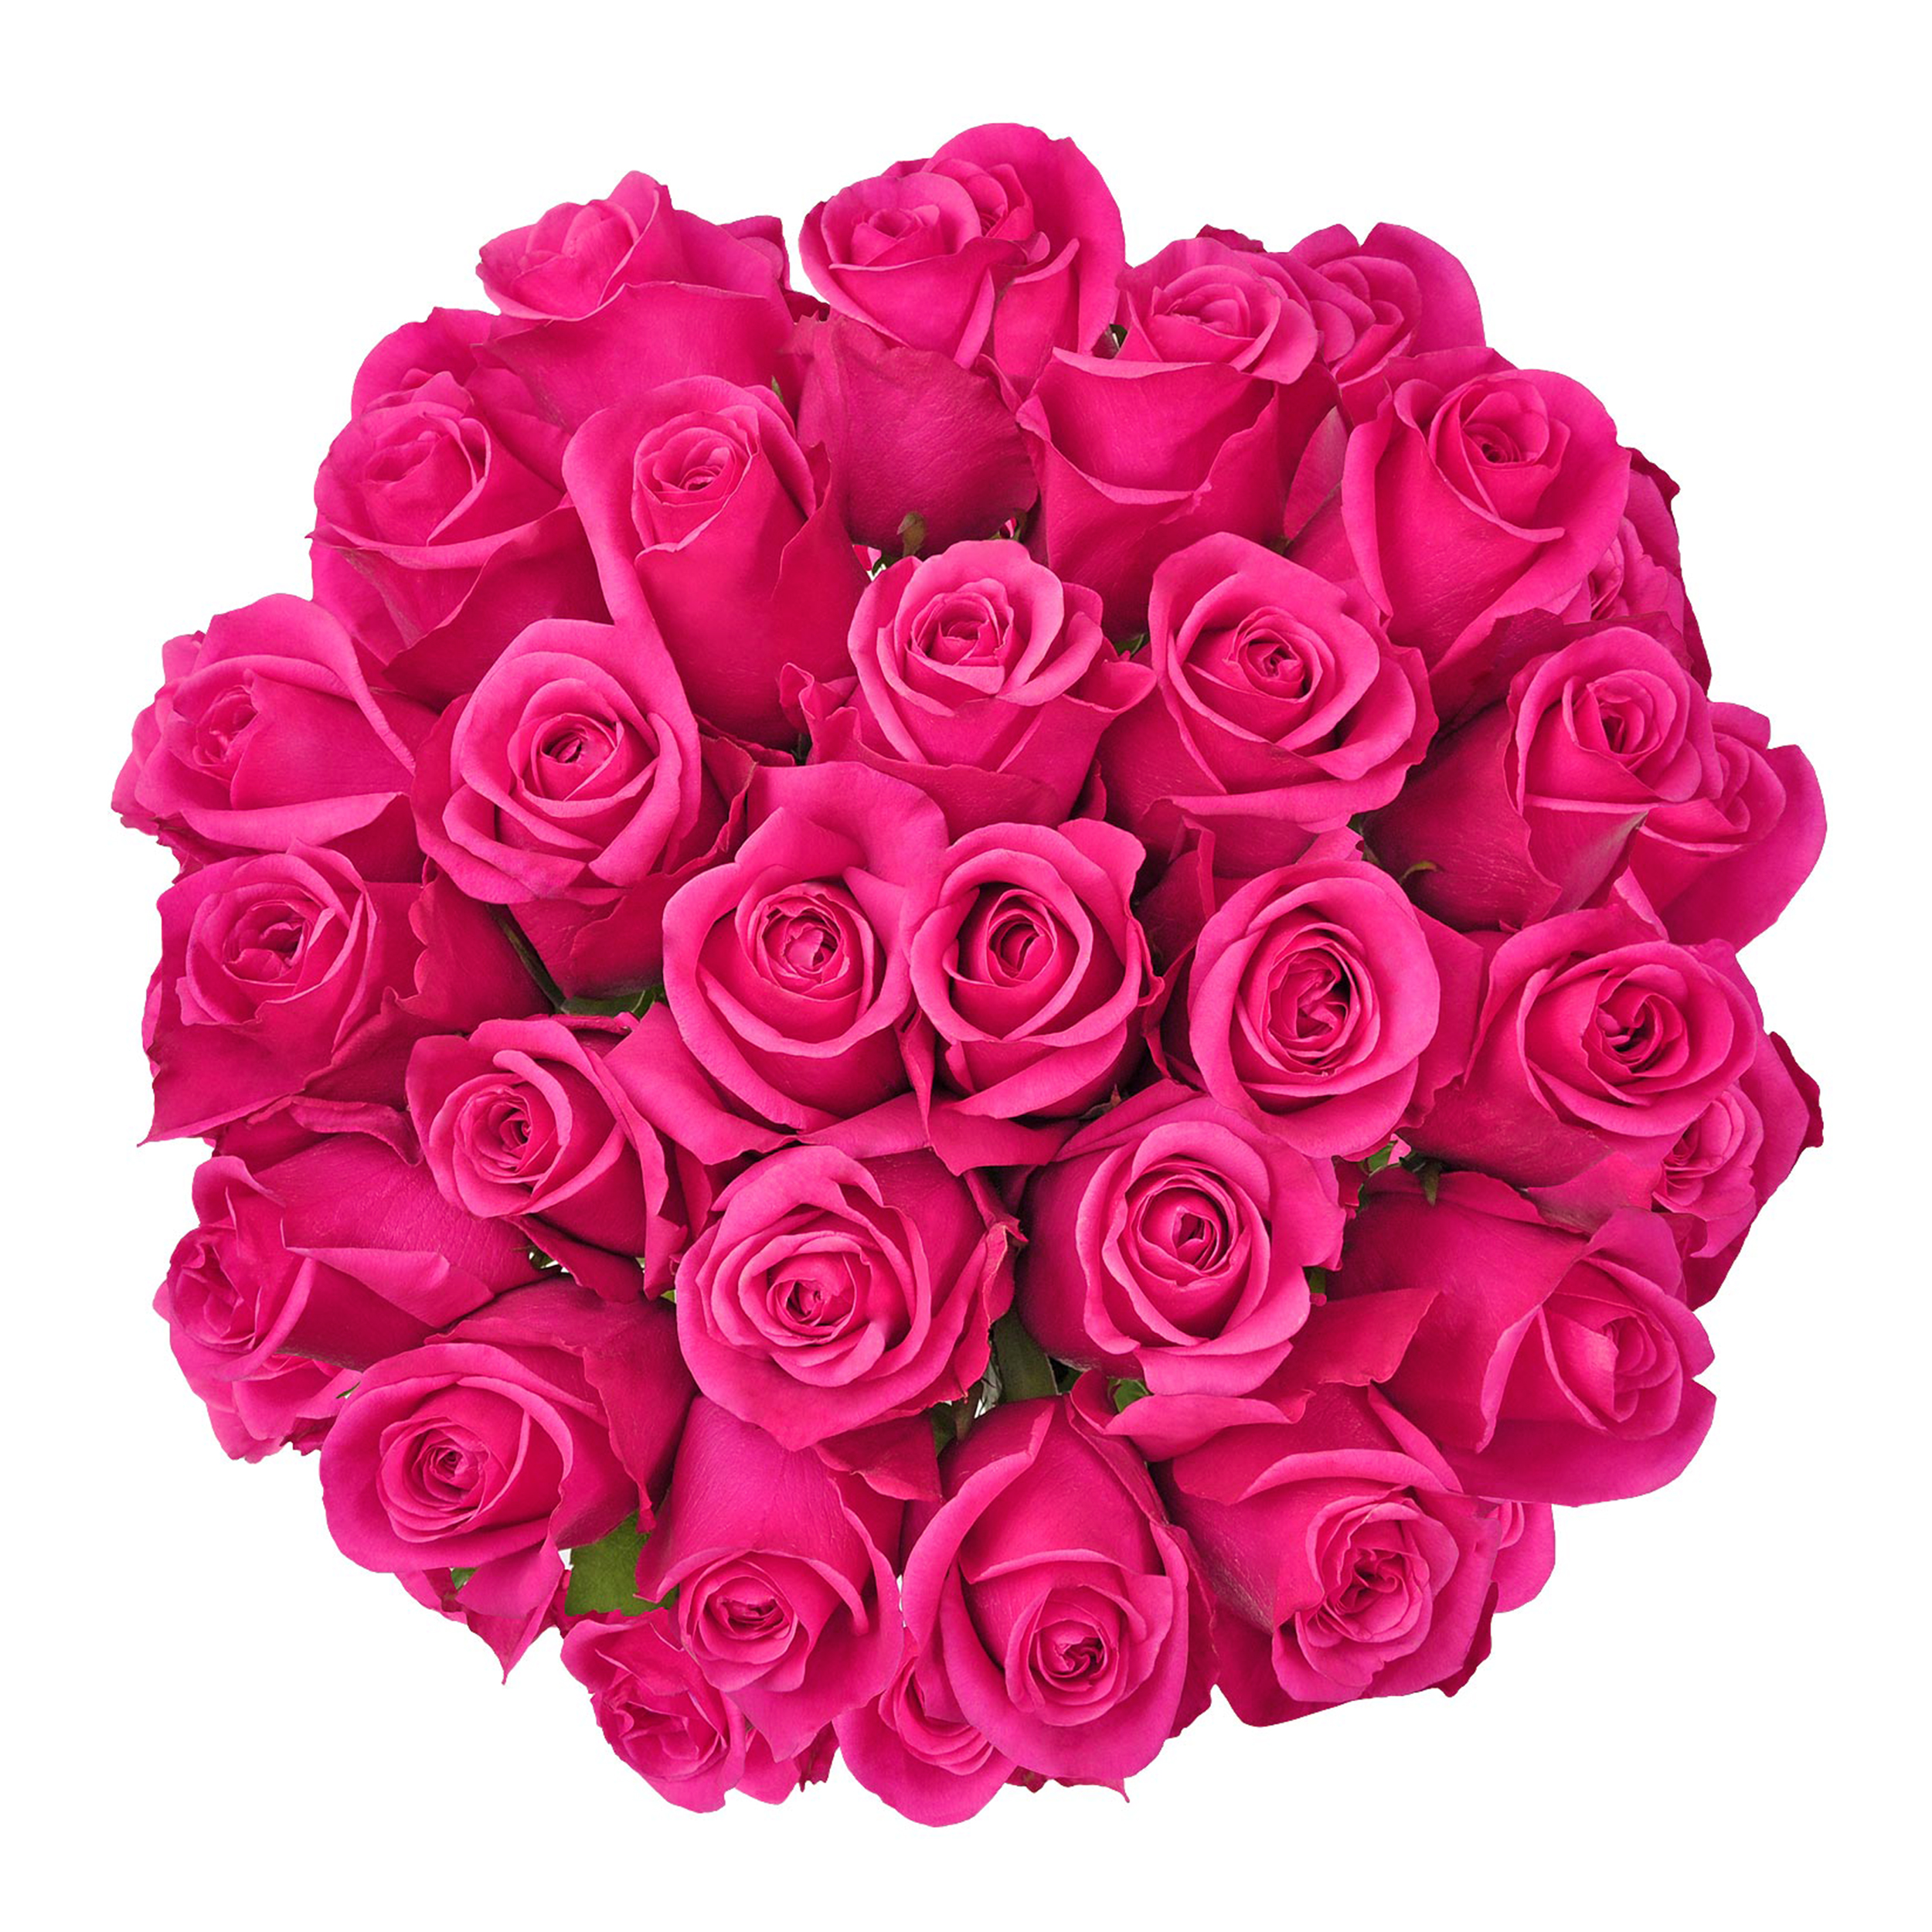 Hot Pink Roses 50 cm - Fresh Cut - 100 Stems, Size: 50 cm / 20 in